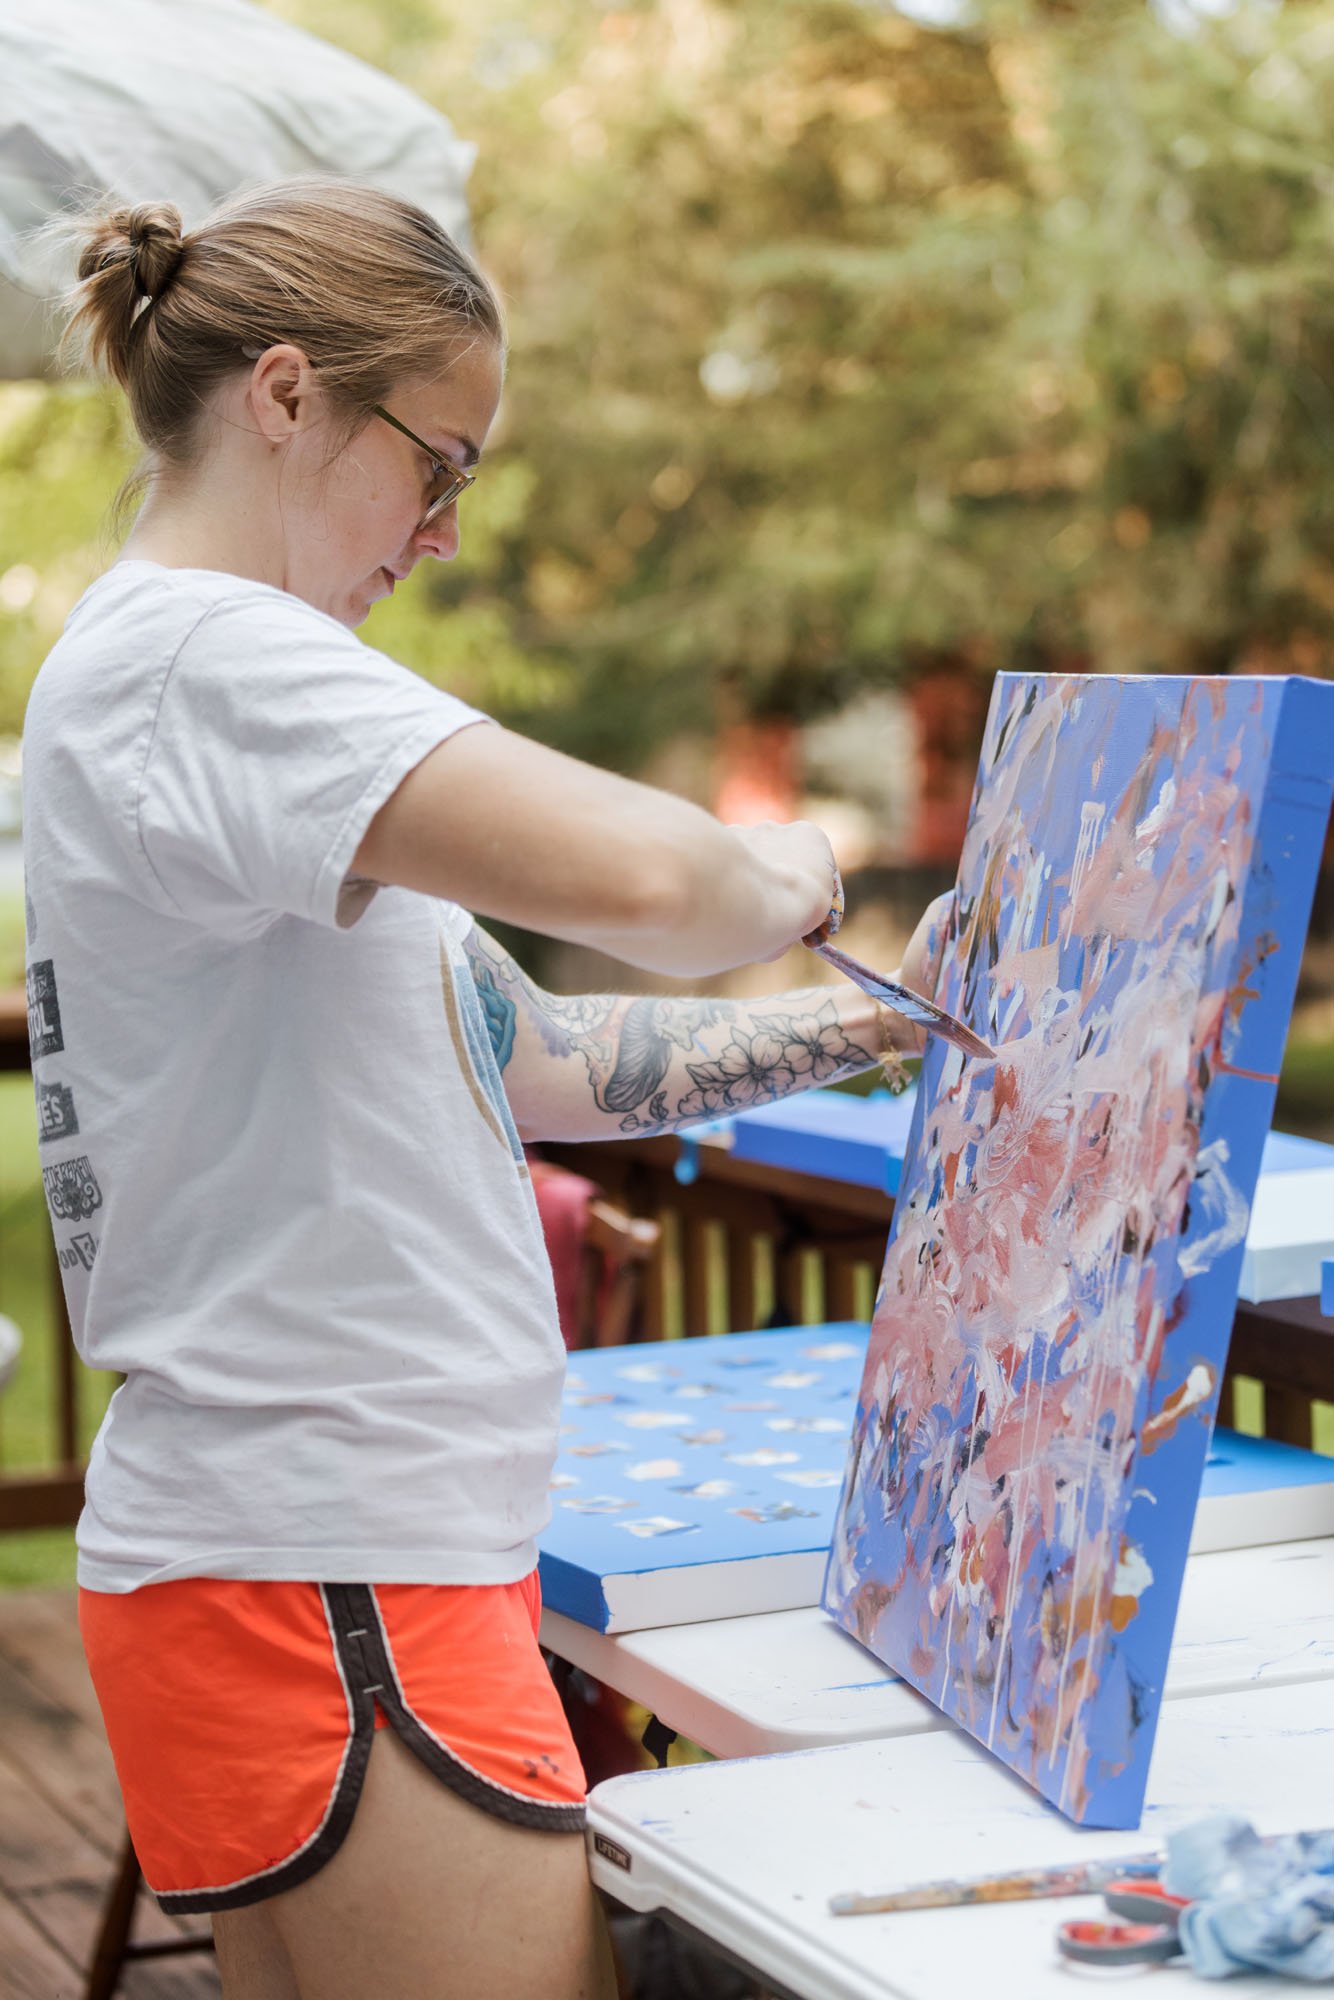 Artist Marcy Parks painted live on the side deck.